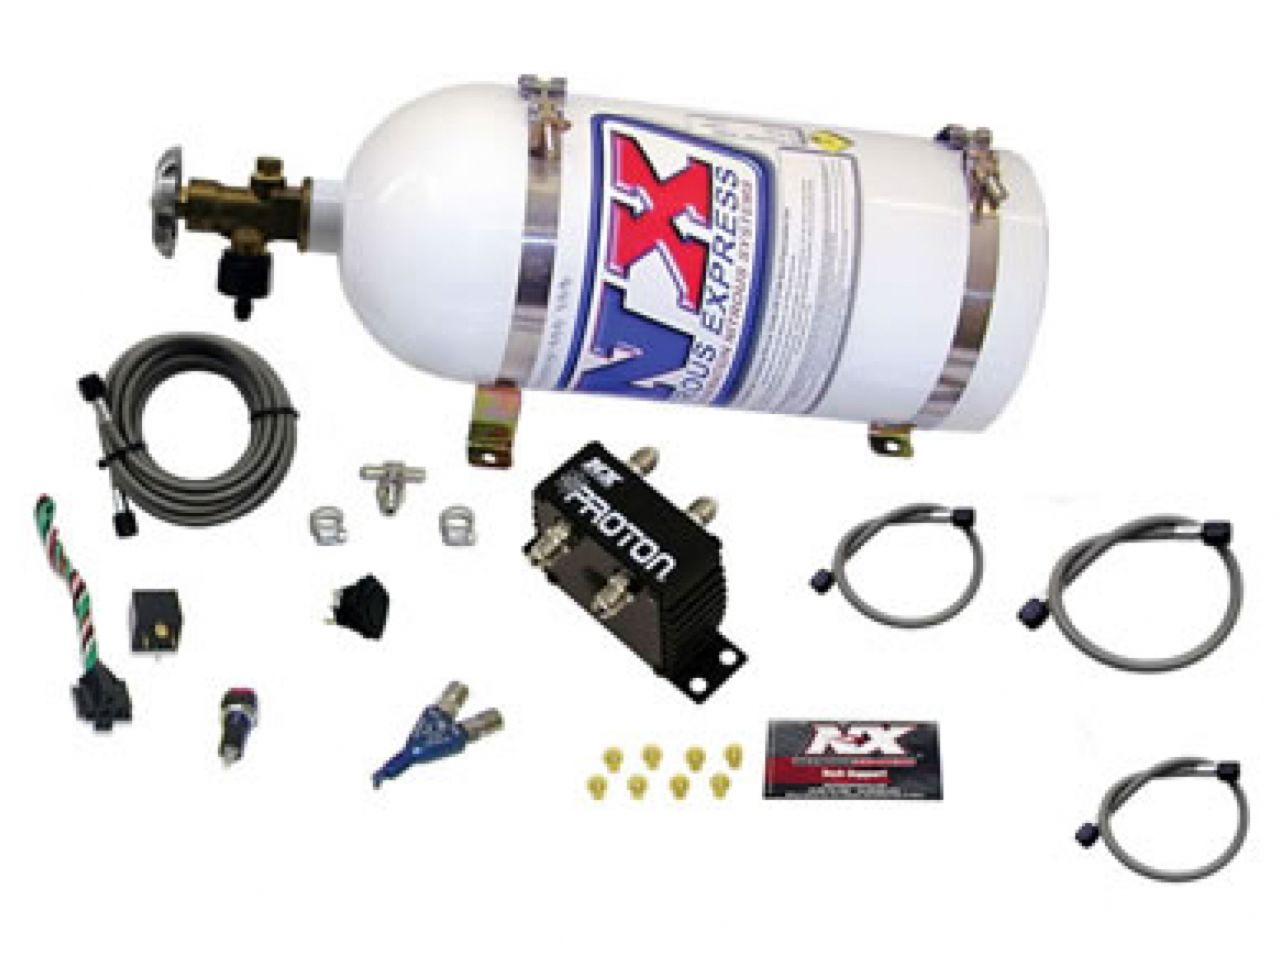 Nitrous Express Nitrous Oxide Kits and Accessories 20420 Item Image